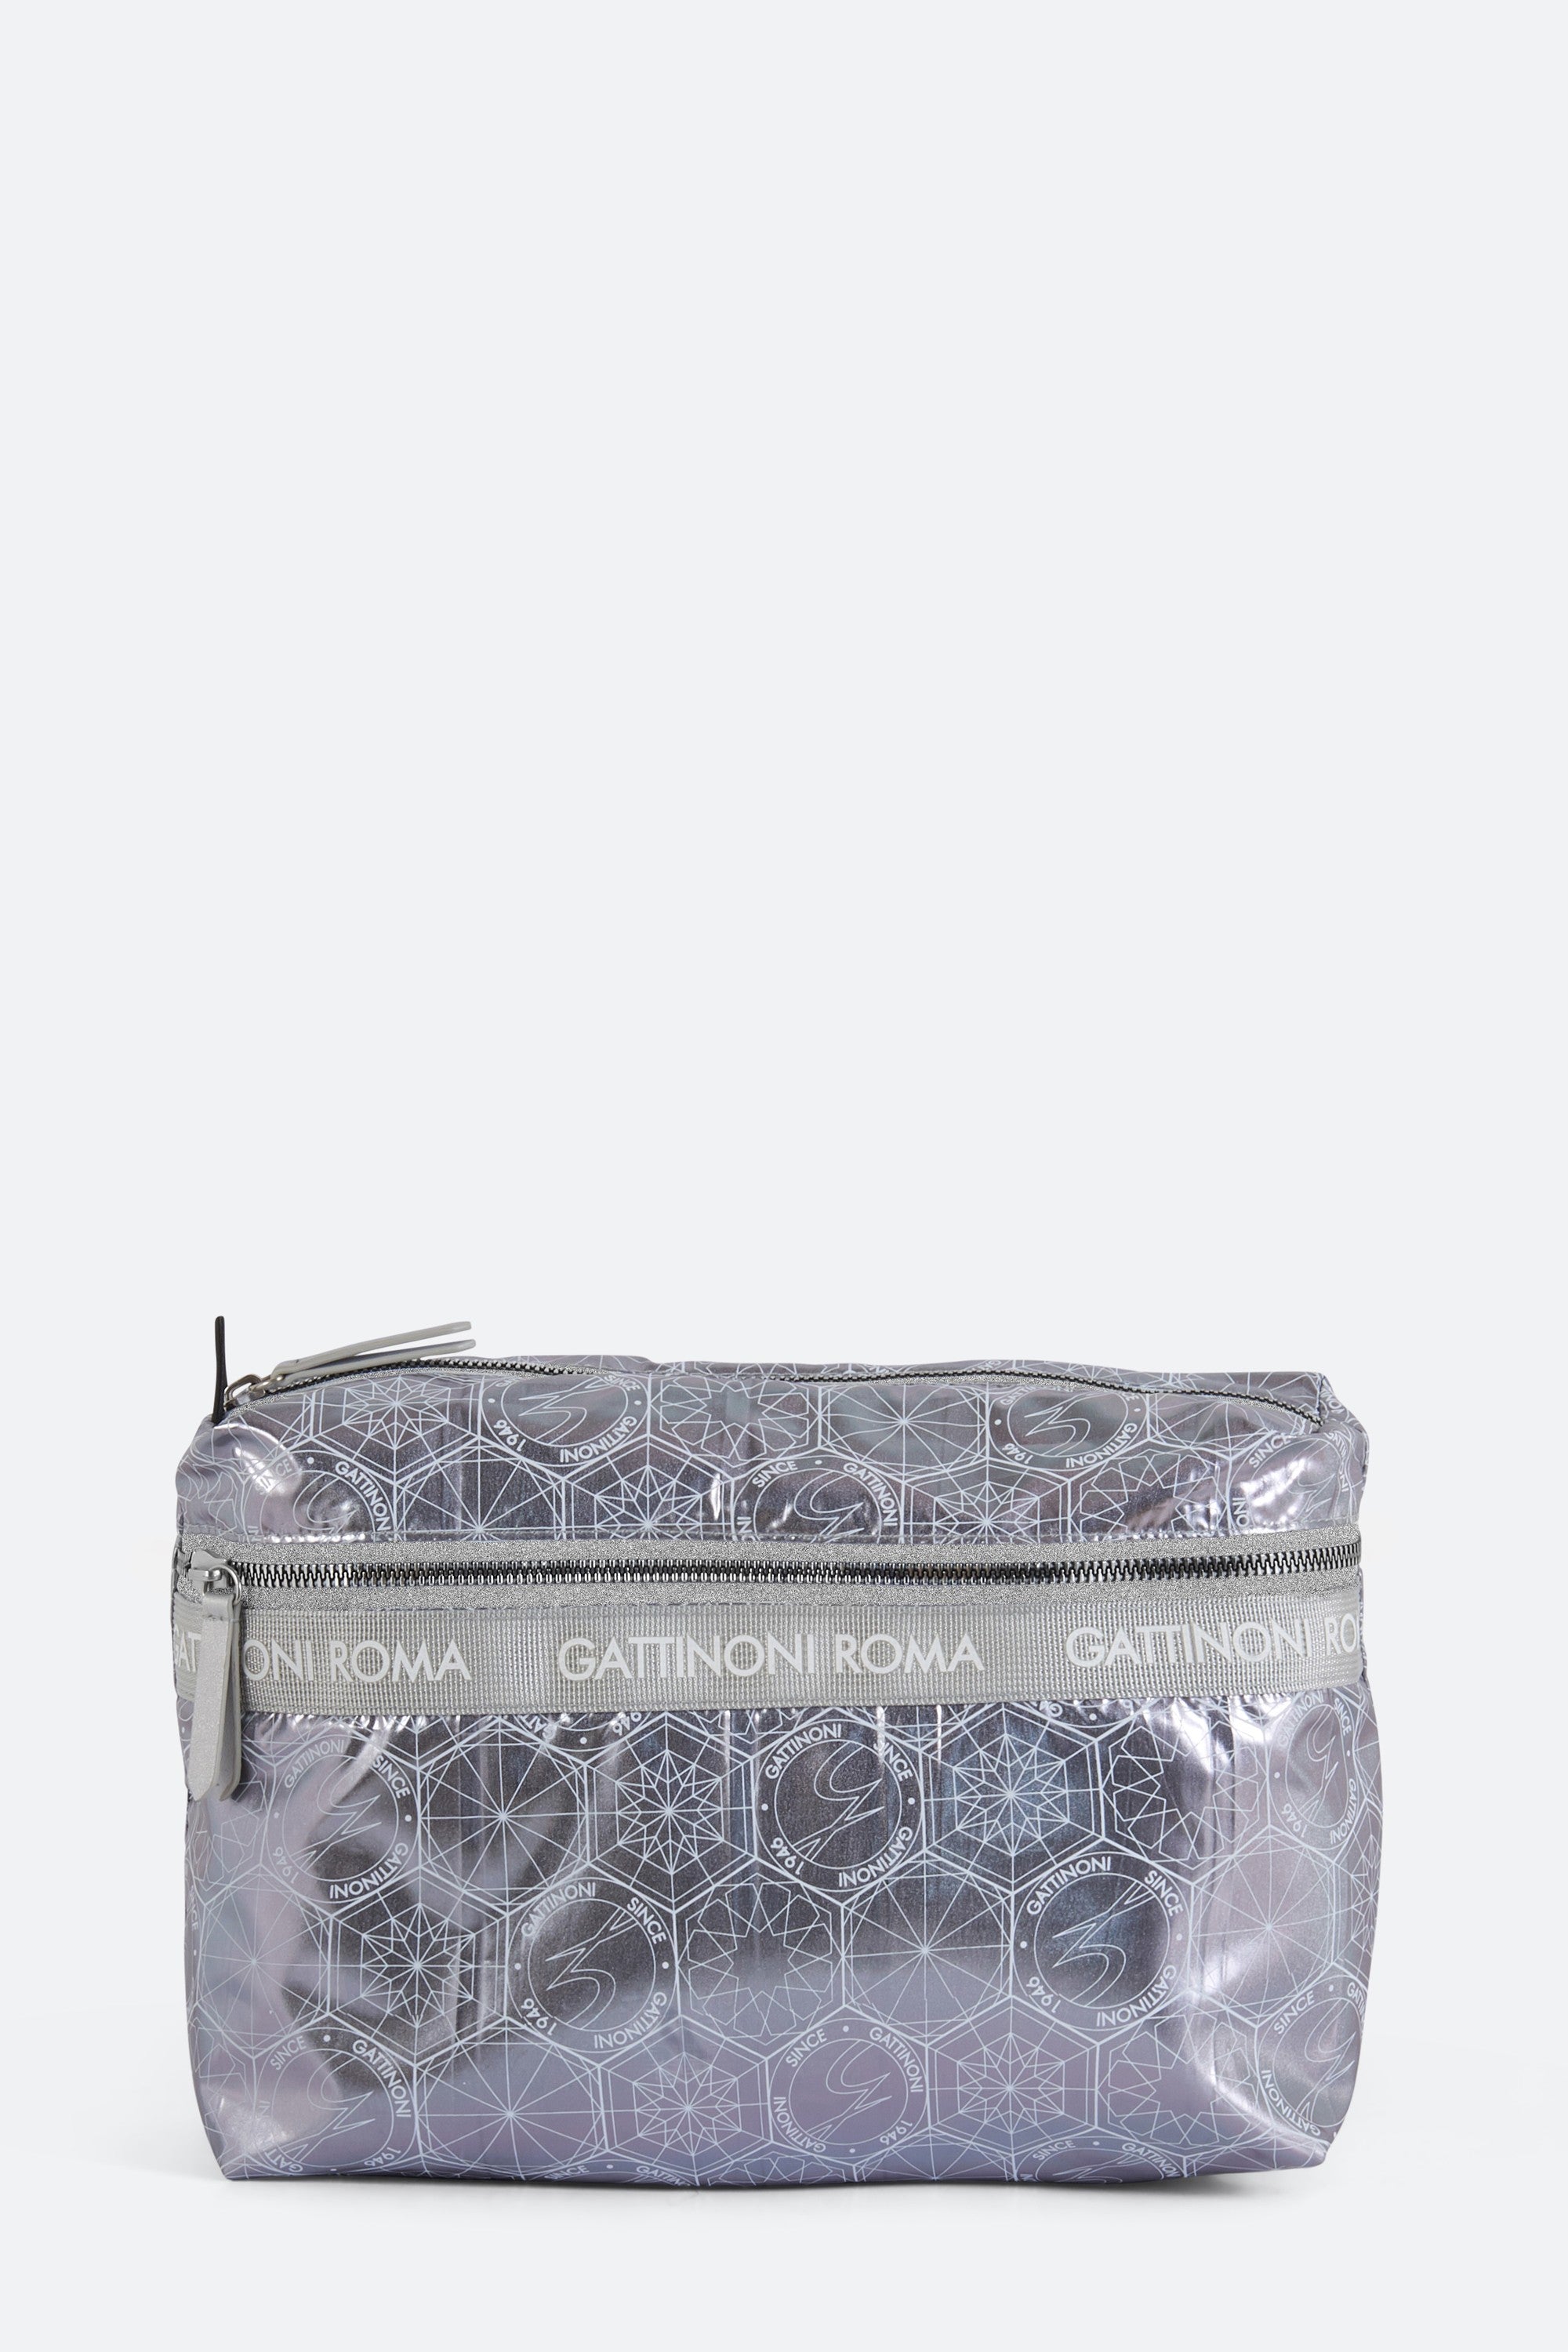 Beauty Case Large EasyChic Sparkly Argento